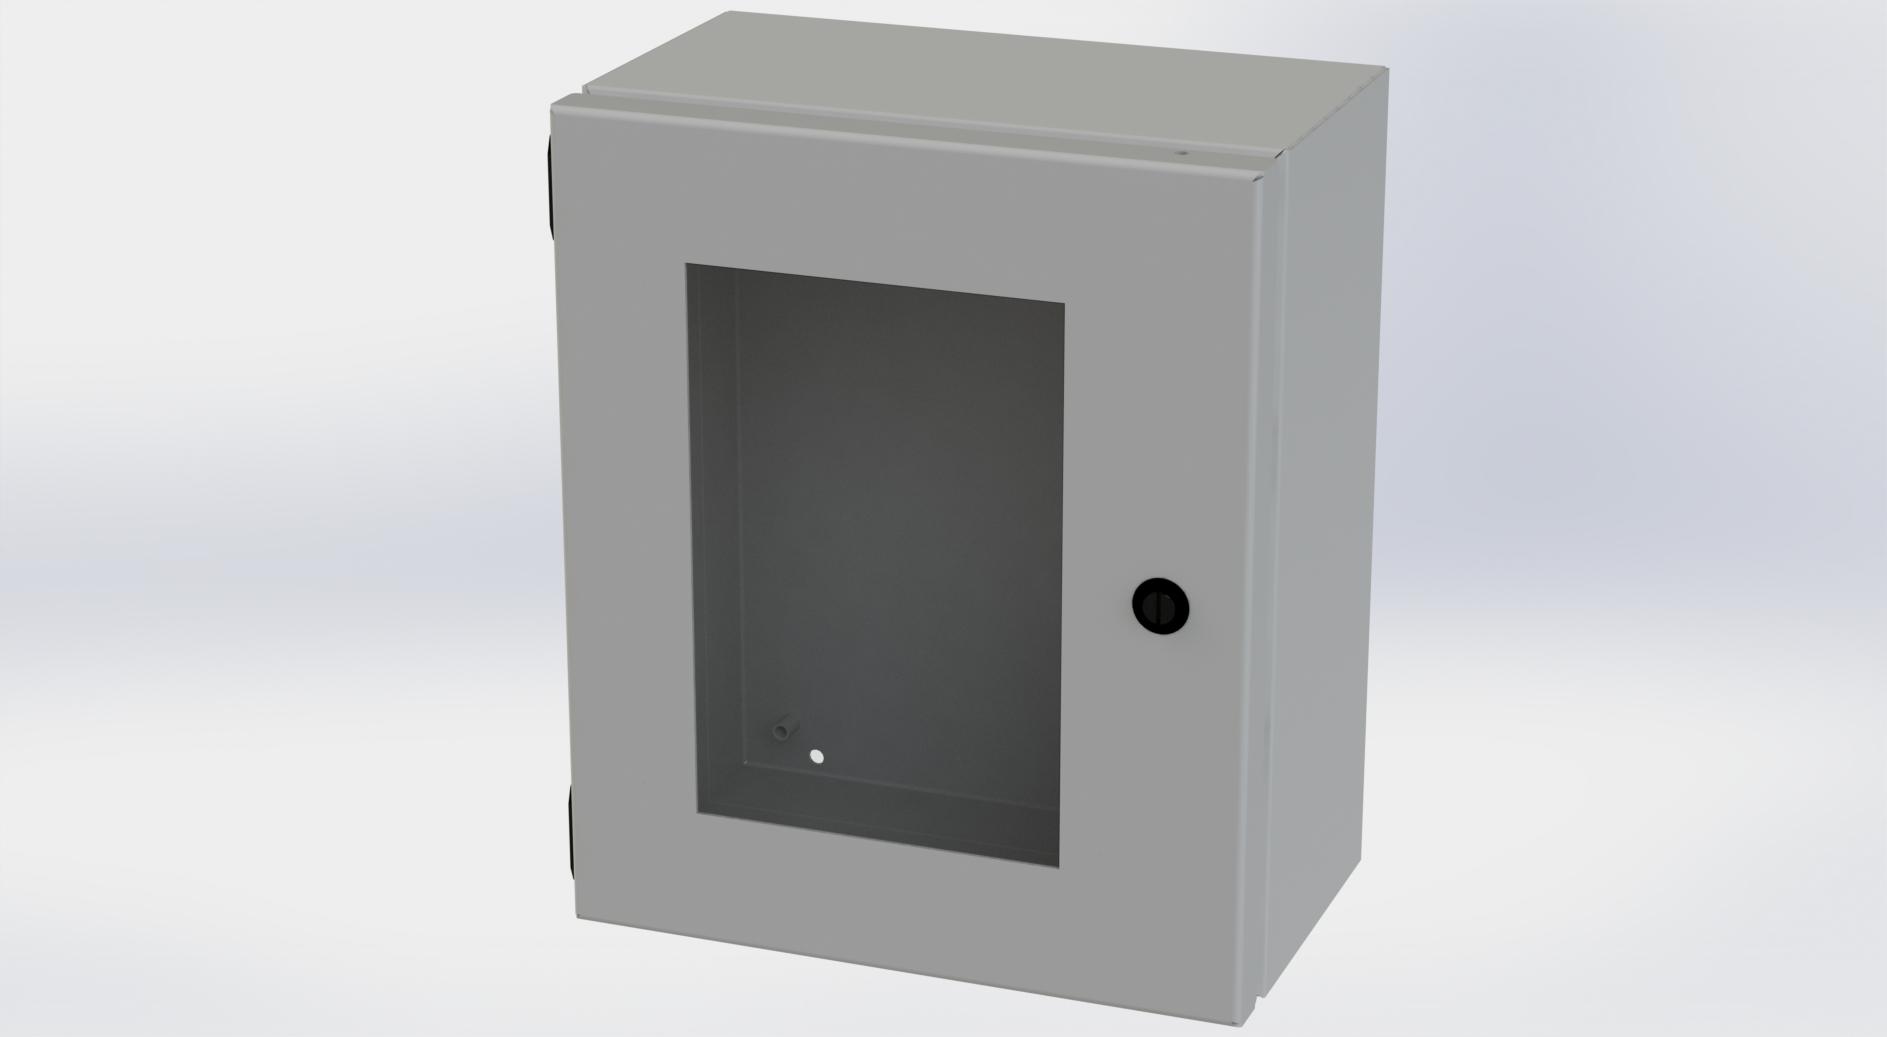 Saginaw Control SCE-1210ELJW ELJ Enclosure W/Viewing Window, Height:12.00", Width:10.00", Depth:6.00", ANSI-61 gray powder coating inside and out. Optional sub-panels are powder coated white.